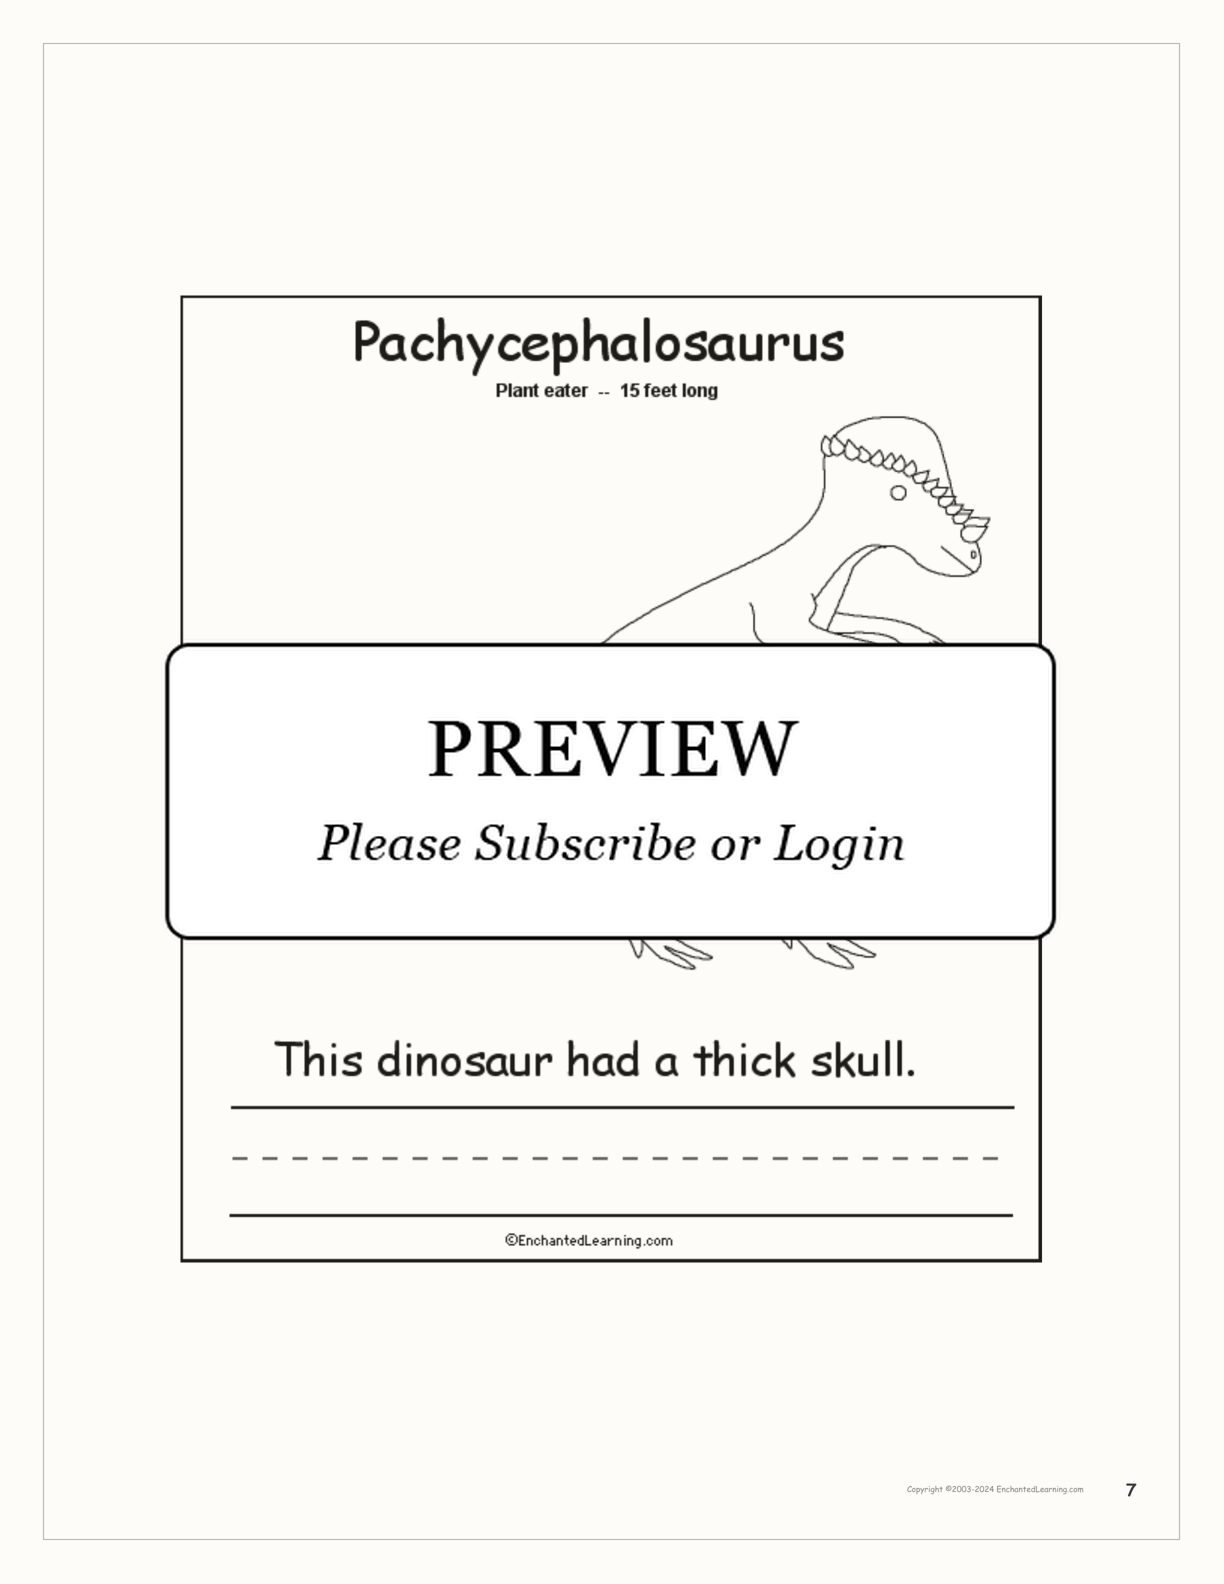 This Dinosaur... Early Reader Book interactive printout page 7